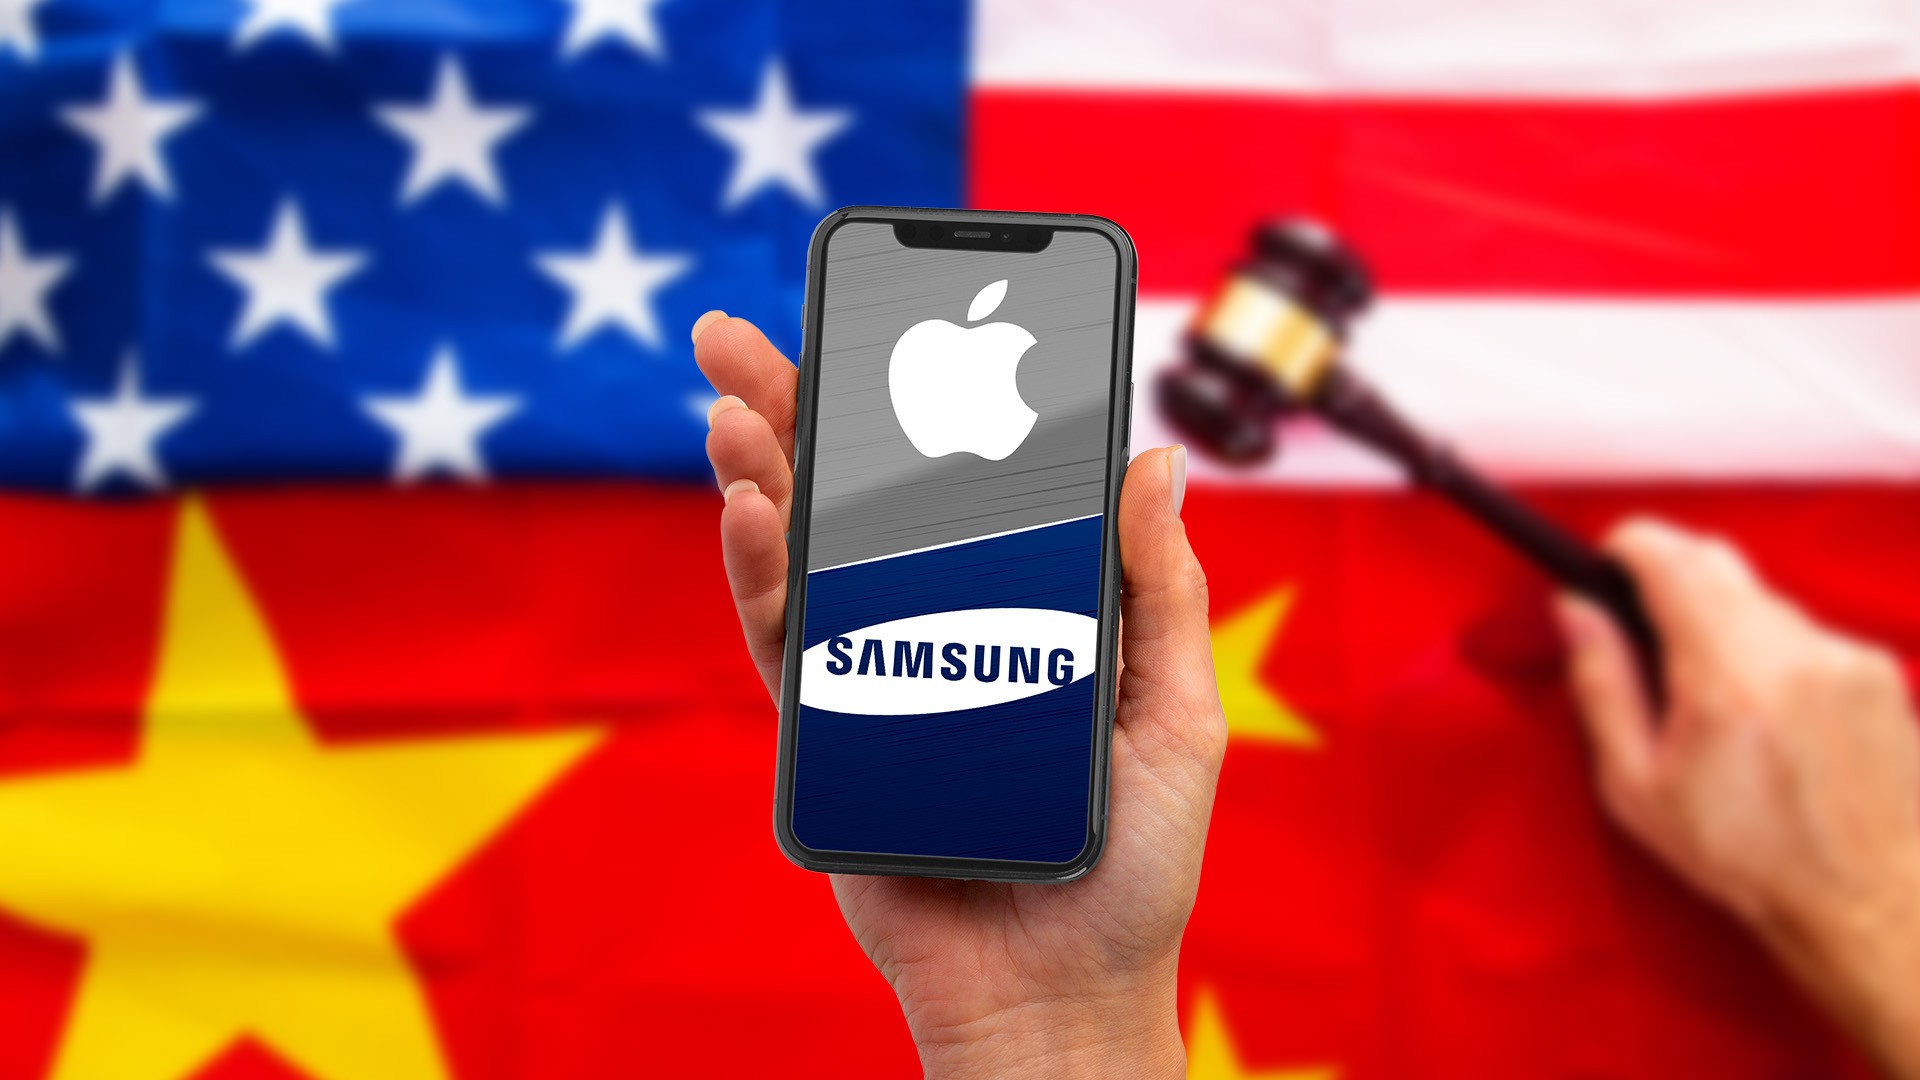 Apple turns to Samsung to make iPhone NAND memory chips after US sanctions on China
